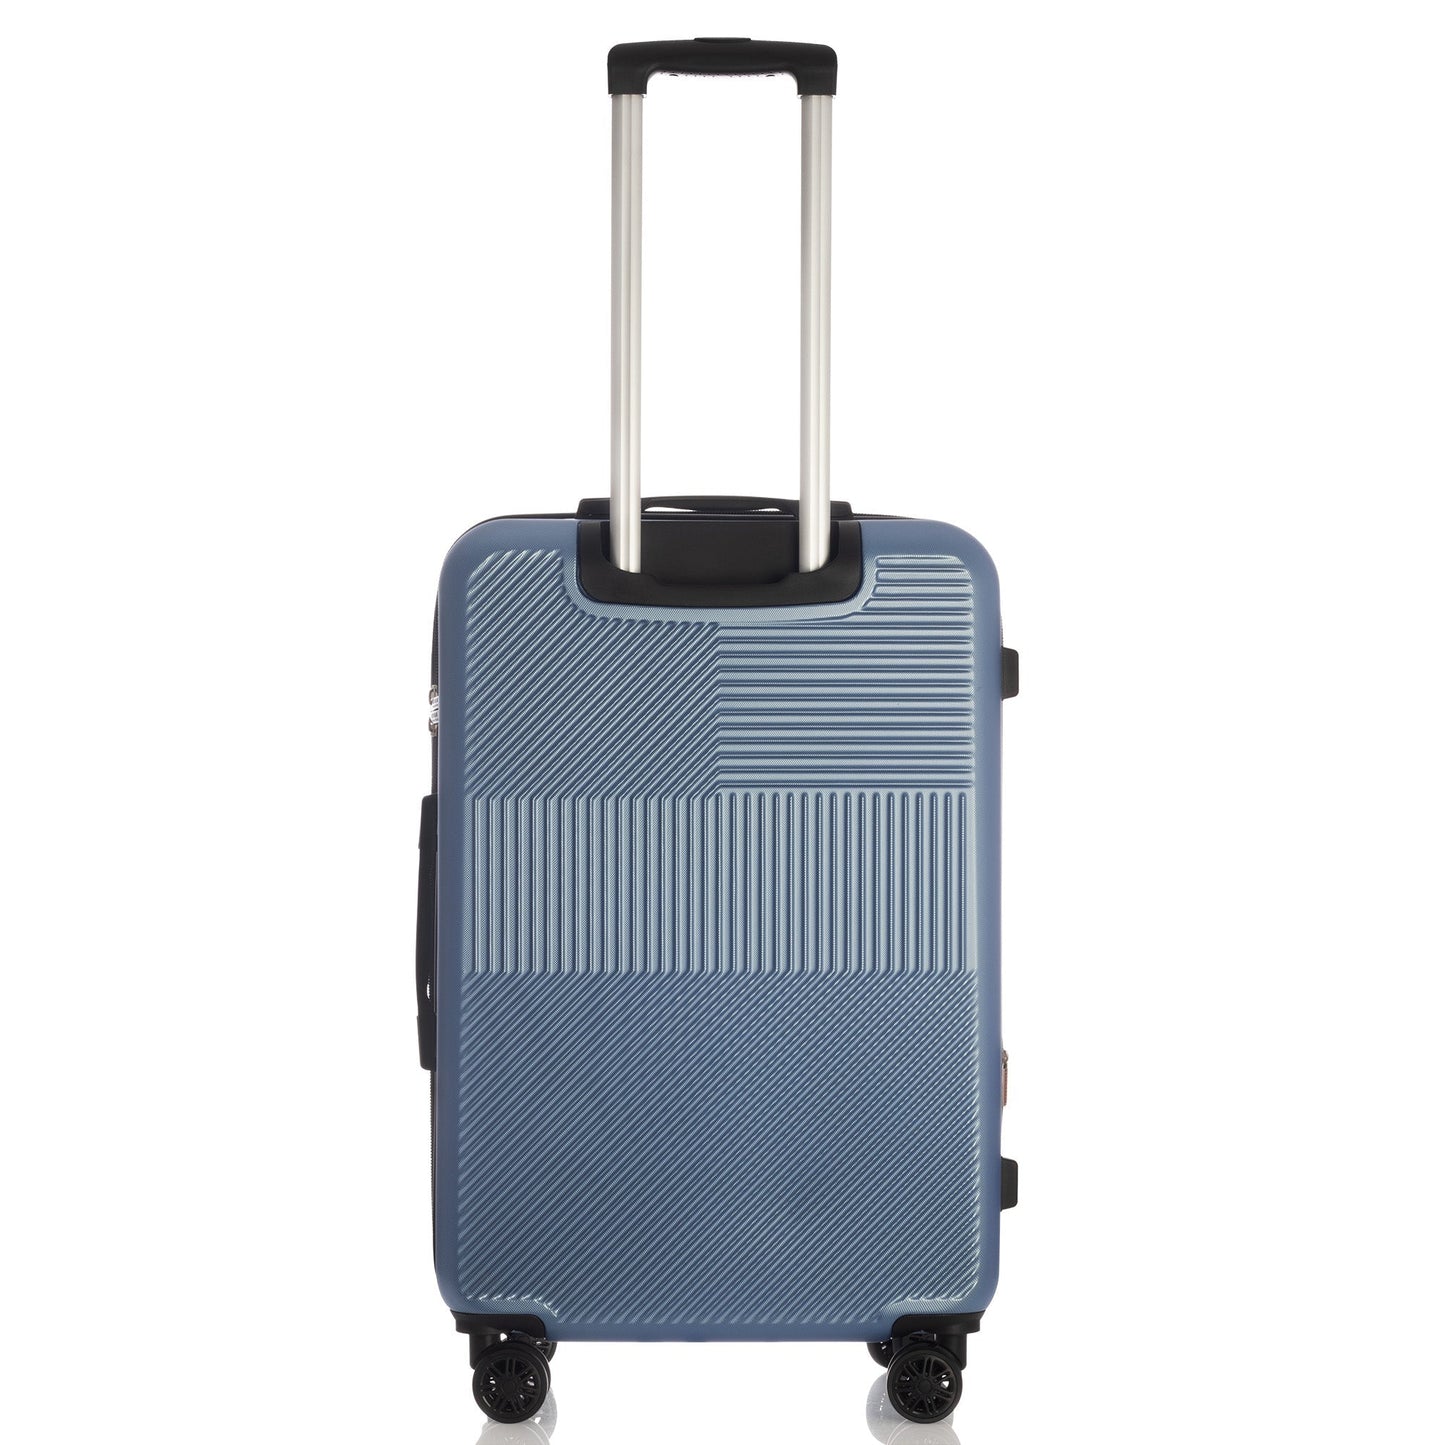 Vita collection luggage blue (18/22/26/30") Suitcase Lock Spinne